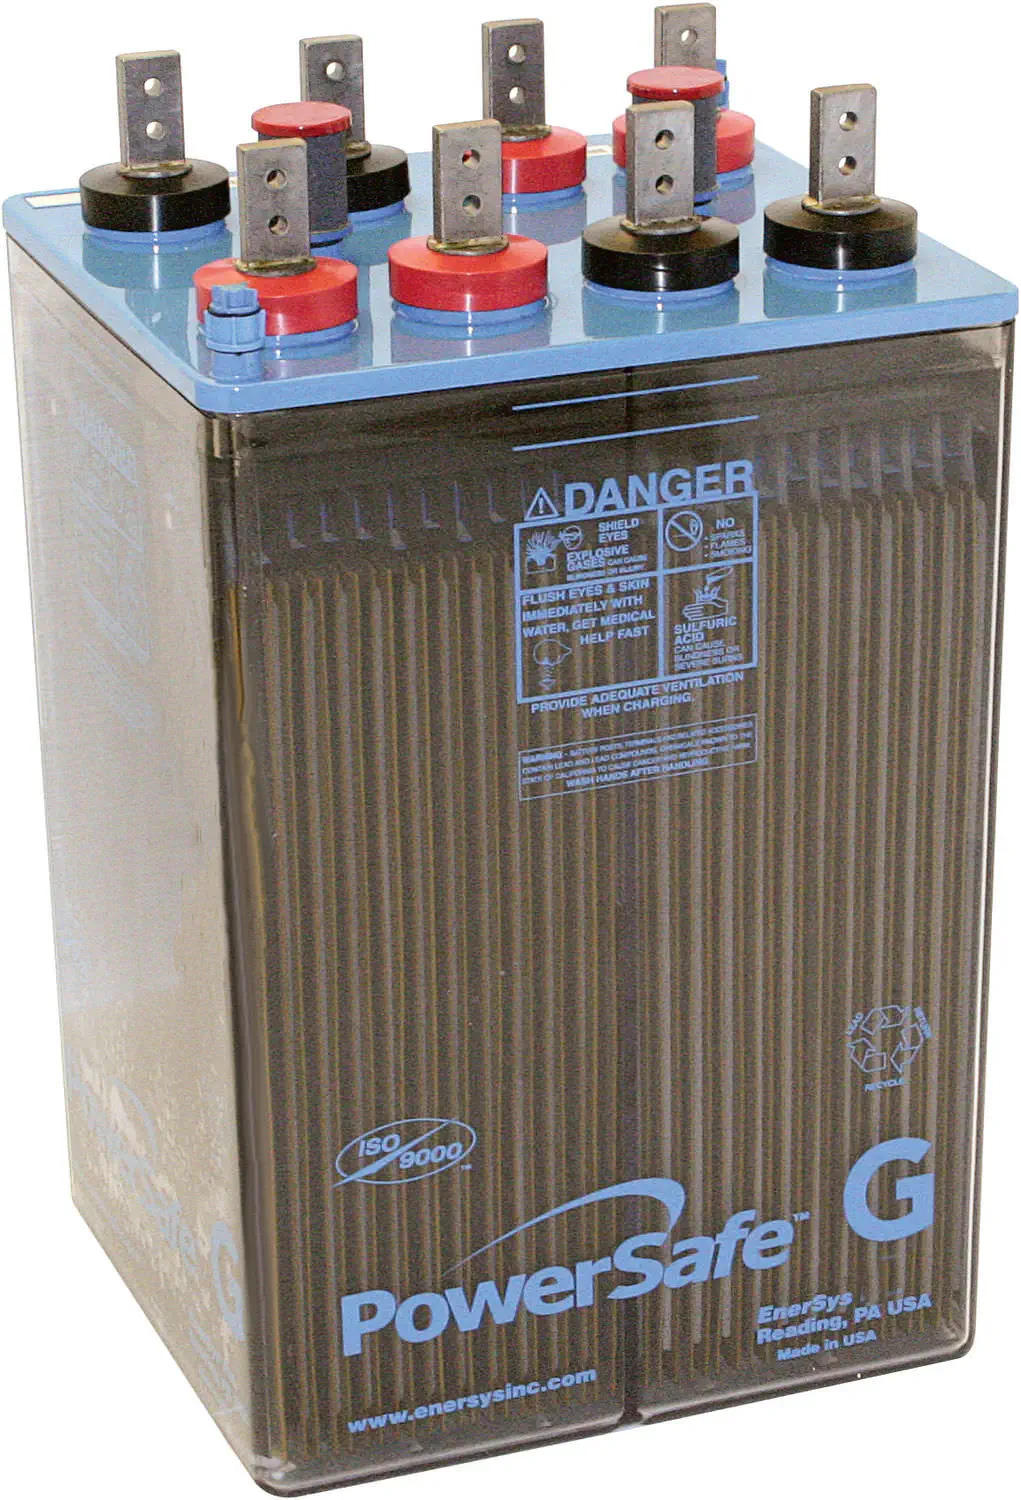 EnerSys PowerSafe GN-27